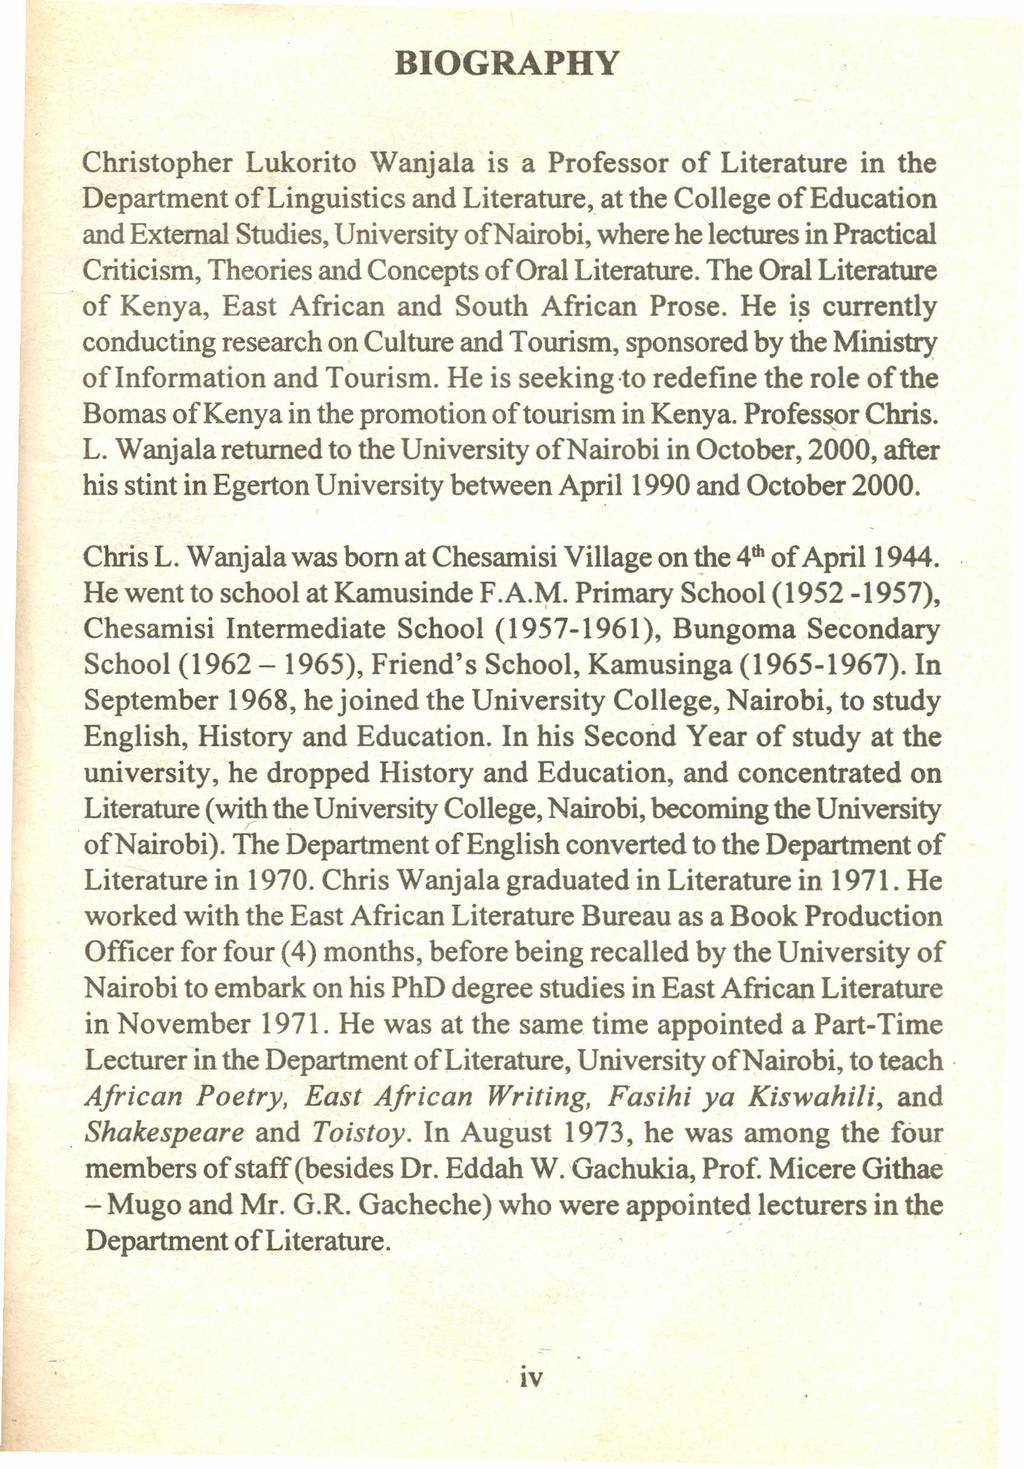 BIOGRAPHY Christopher Lukorito Wanjala is a Professor of Literature in the Department of Linguistics and Literature, at the College of Education and External Studies, University of Nairobi, where he